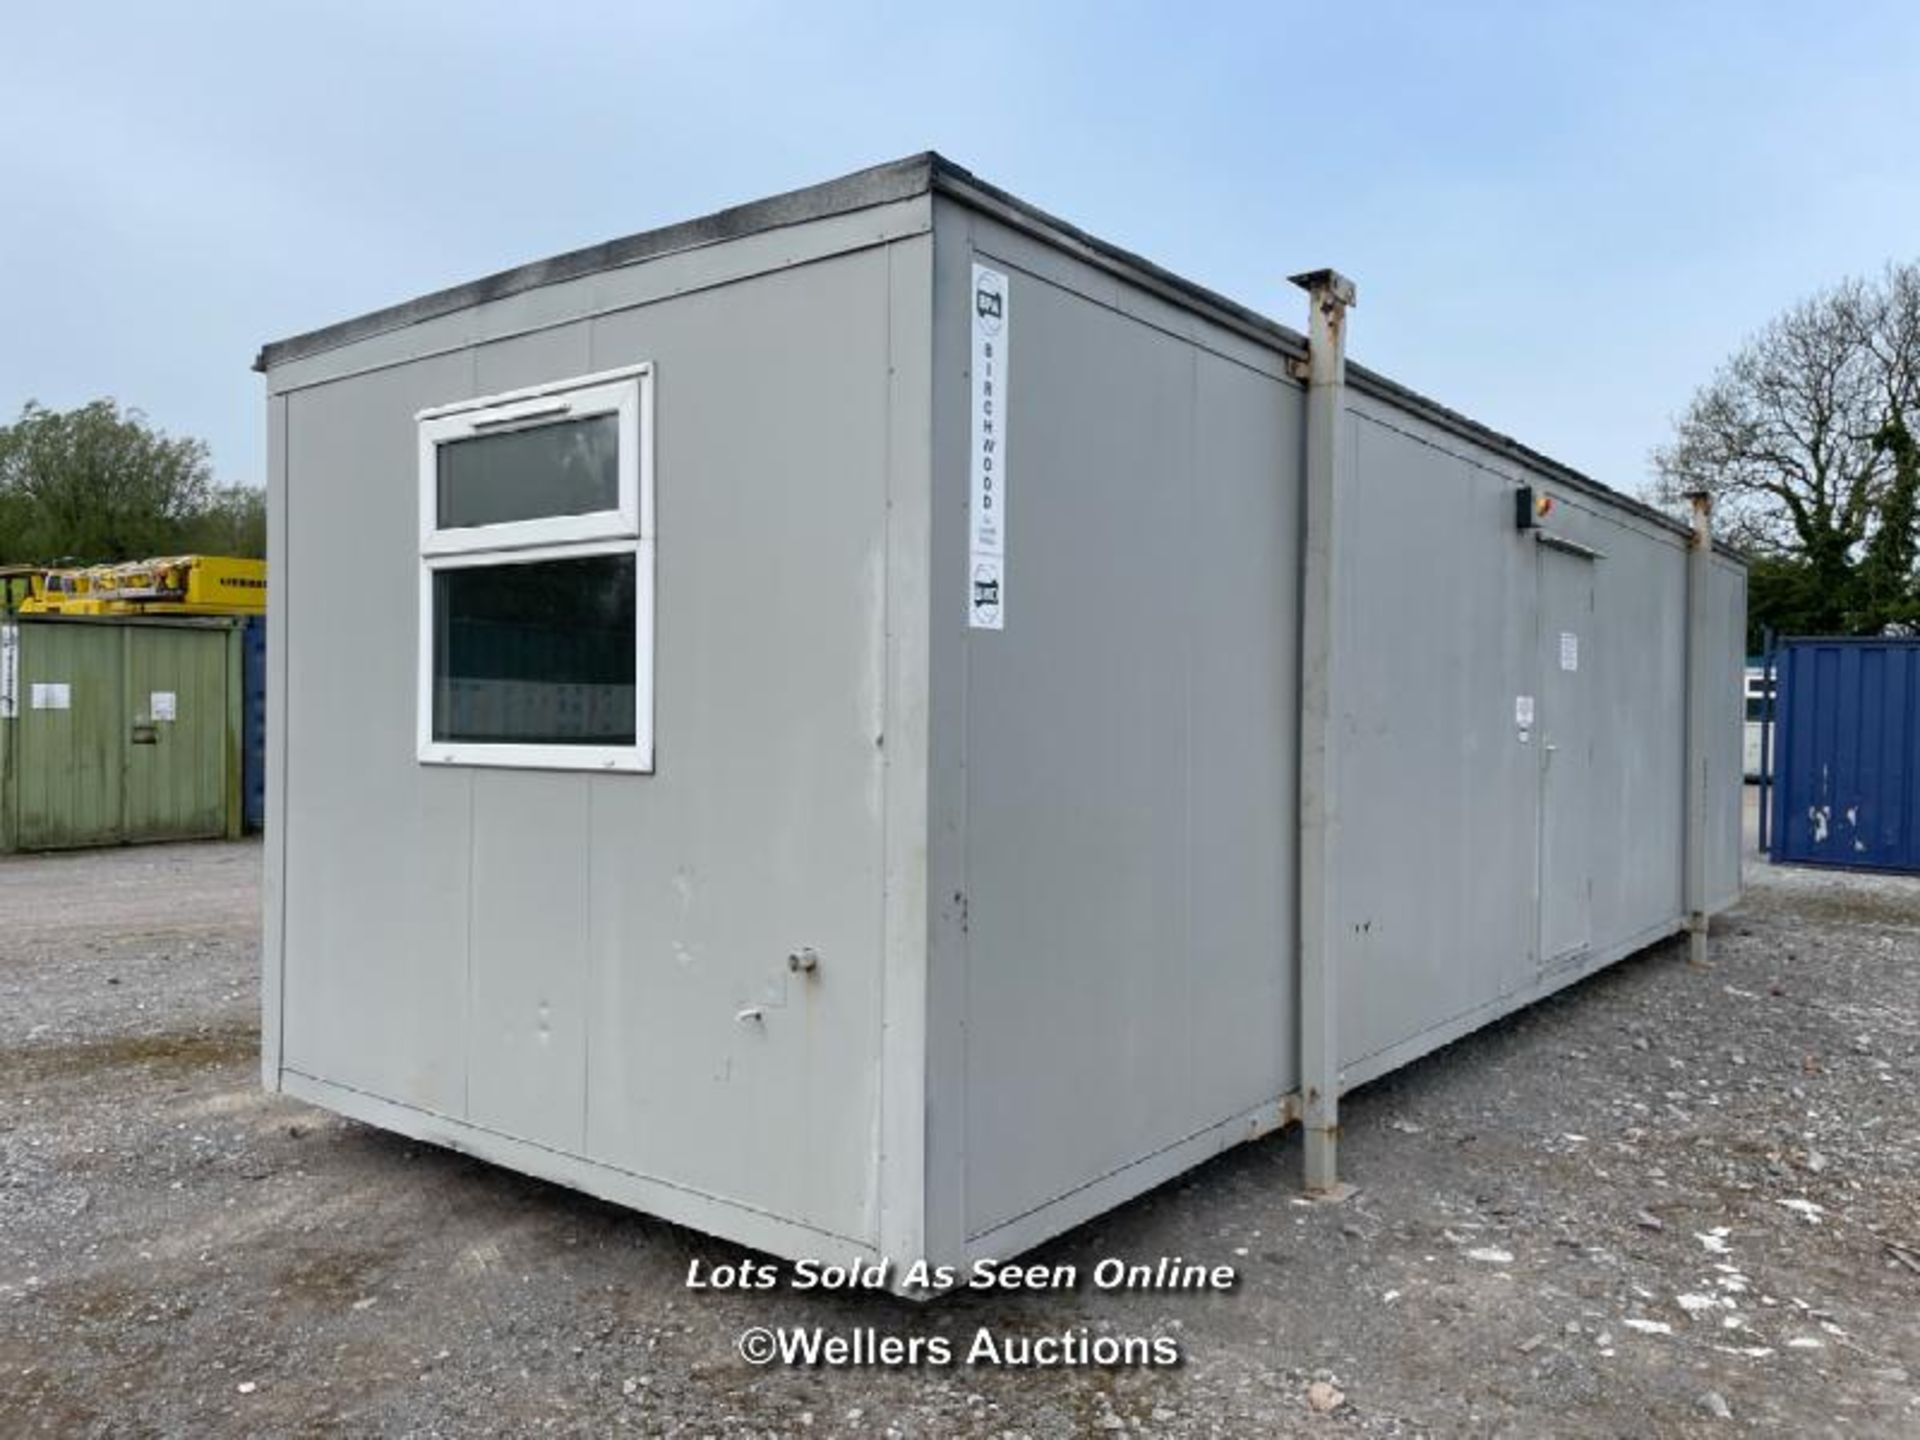 30' x 10' PORTABLE PLASTISOL OFFICE BUILDING, TWO ROOMS, UNIT INCLUDES KITCHENETTE WITH WASH - Image 4 of 21